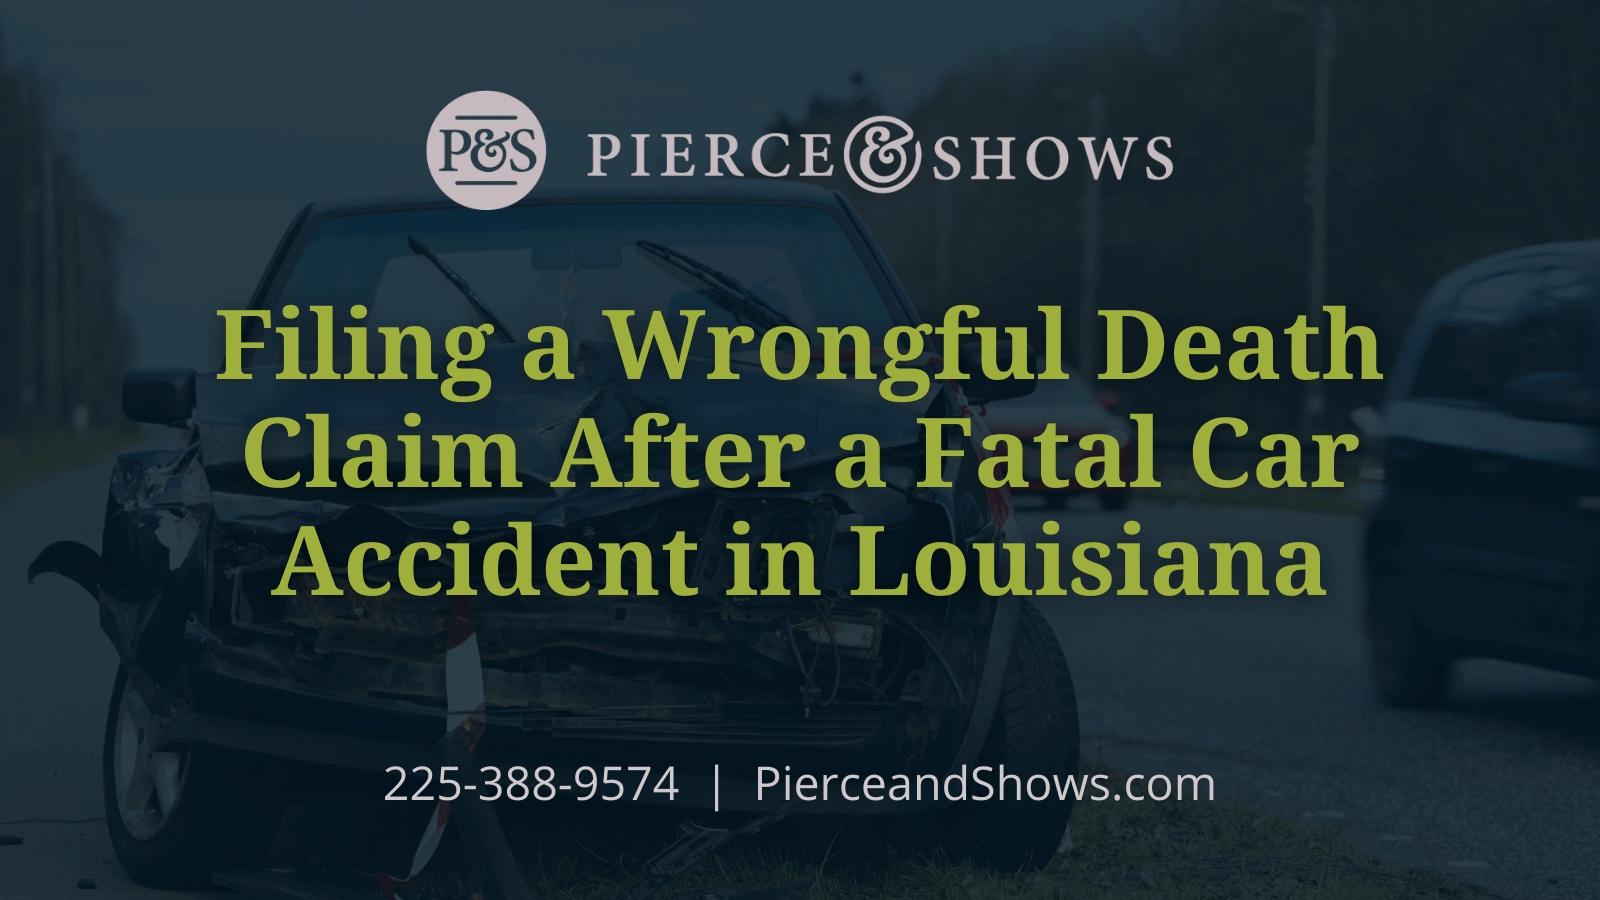 Filing a Wrongful Death Claim After a Fatal Car Accident in Louisiana - Baton Rouge Louisiana injury attorney Pierce & Shows